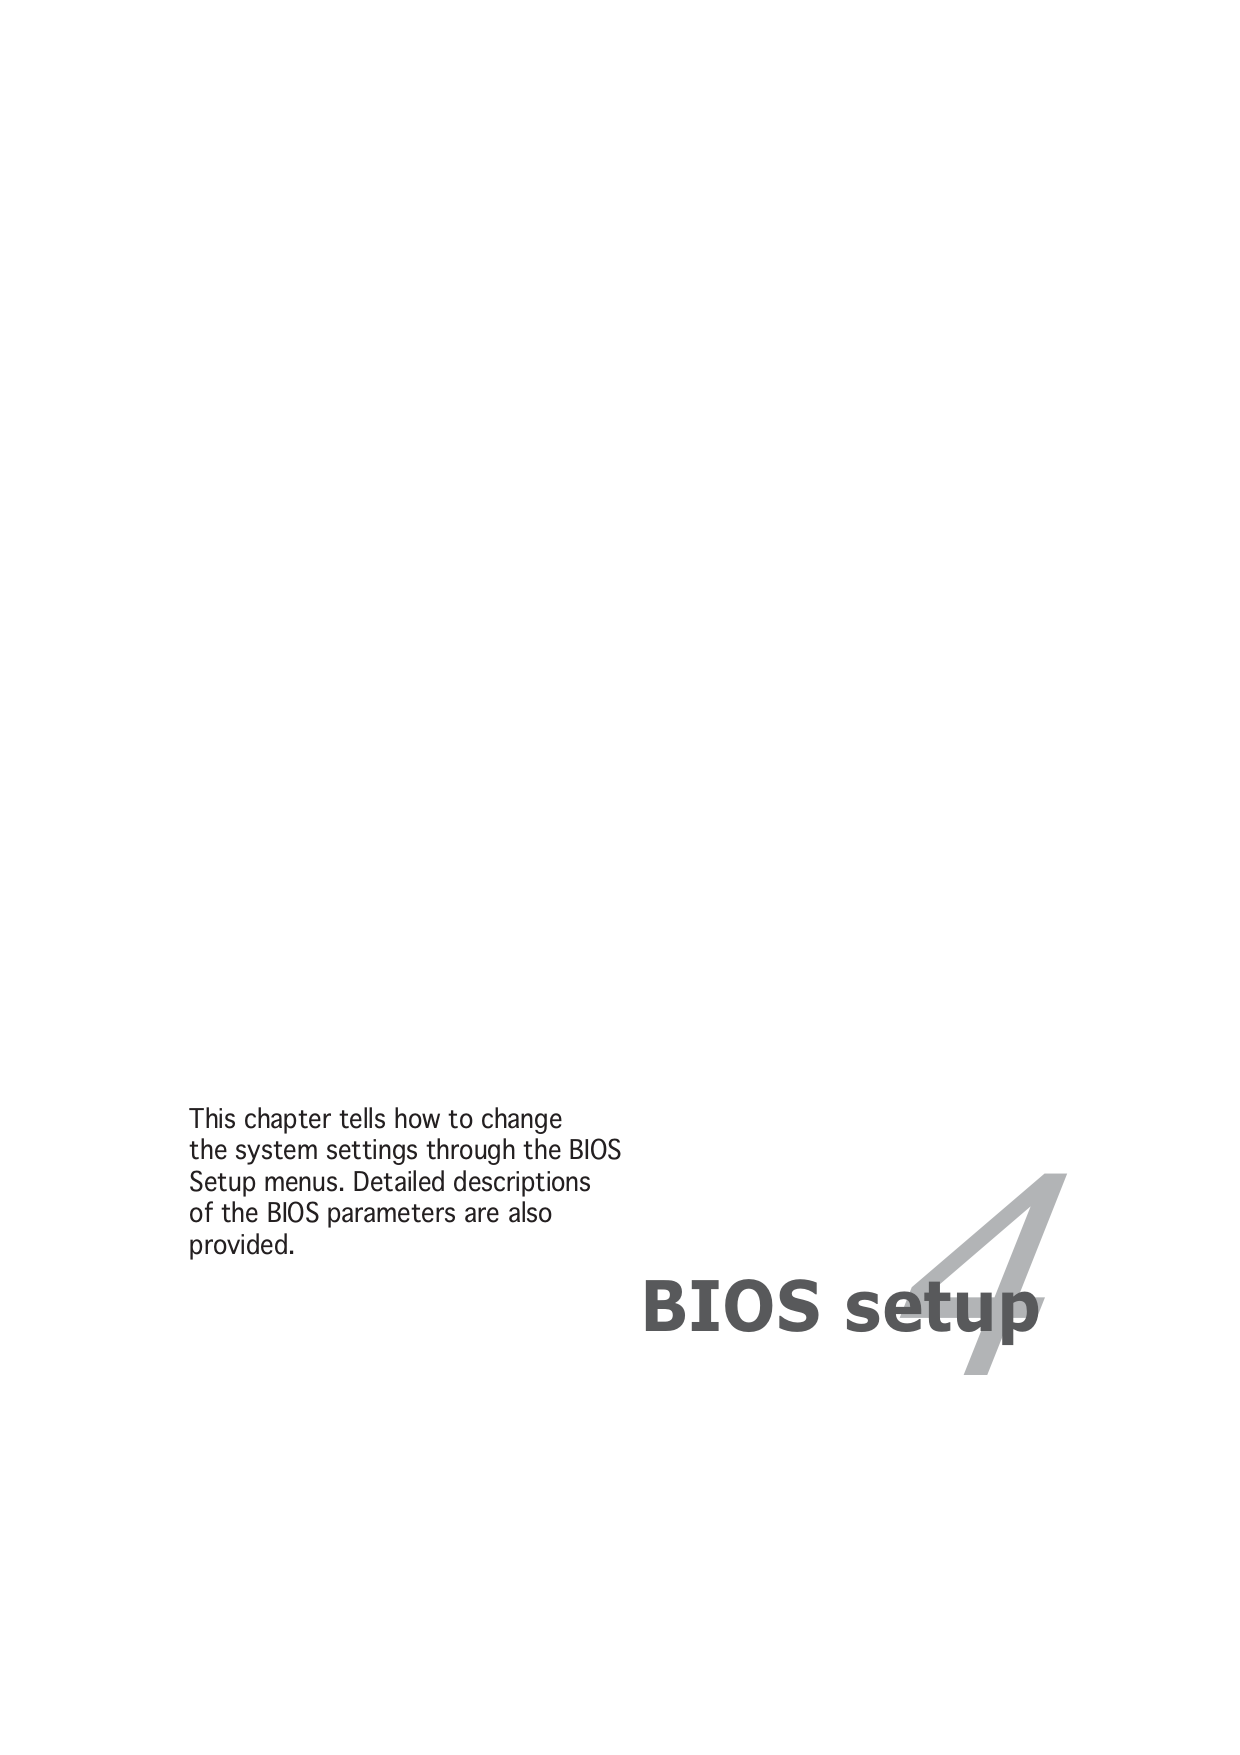 4BIOS setupThis chapter tells how to changethe system settings through the BIOSSetup menus. Detailed descriptionsof the BIOS parameters are alsoprovided.